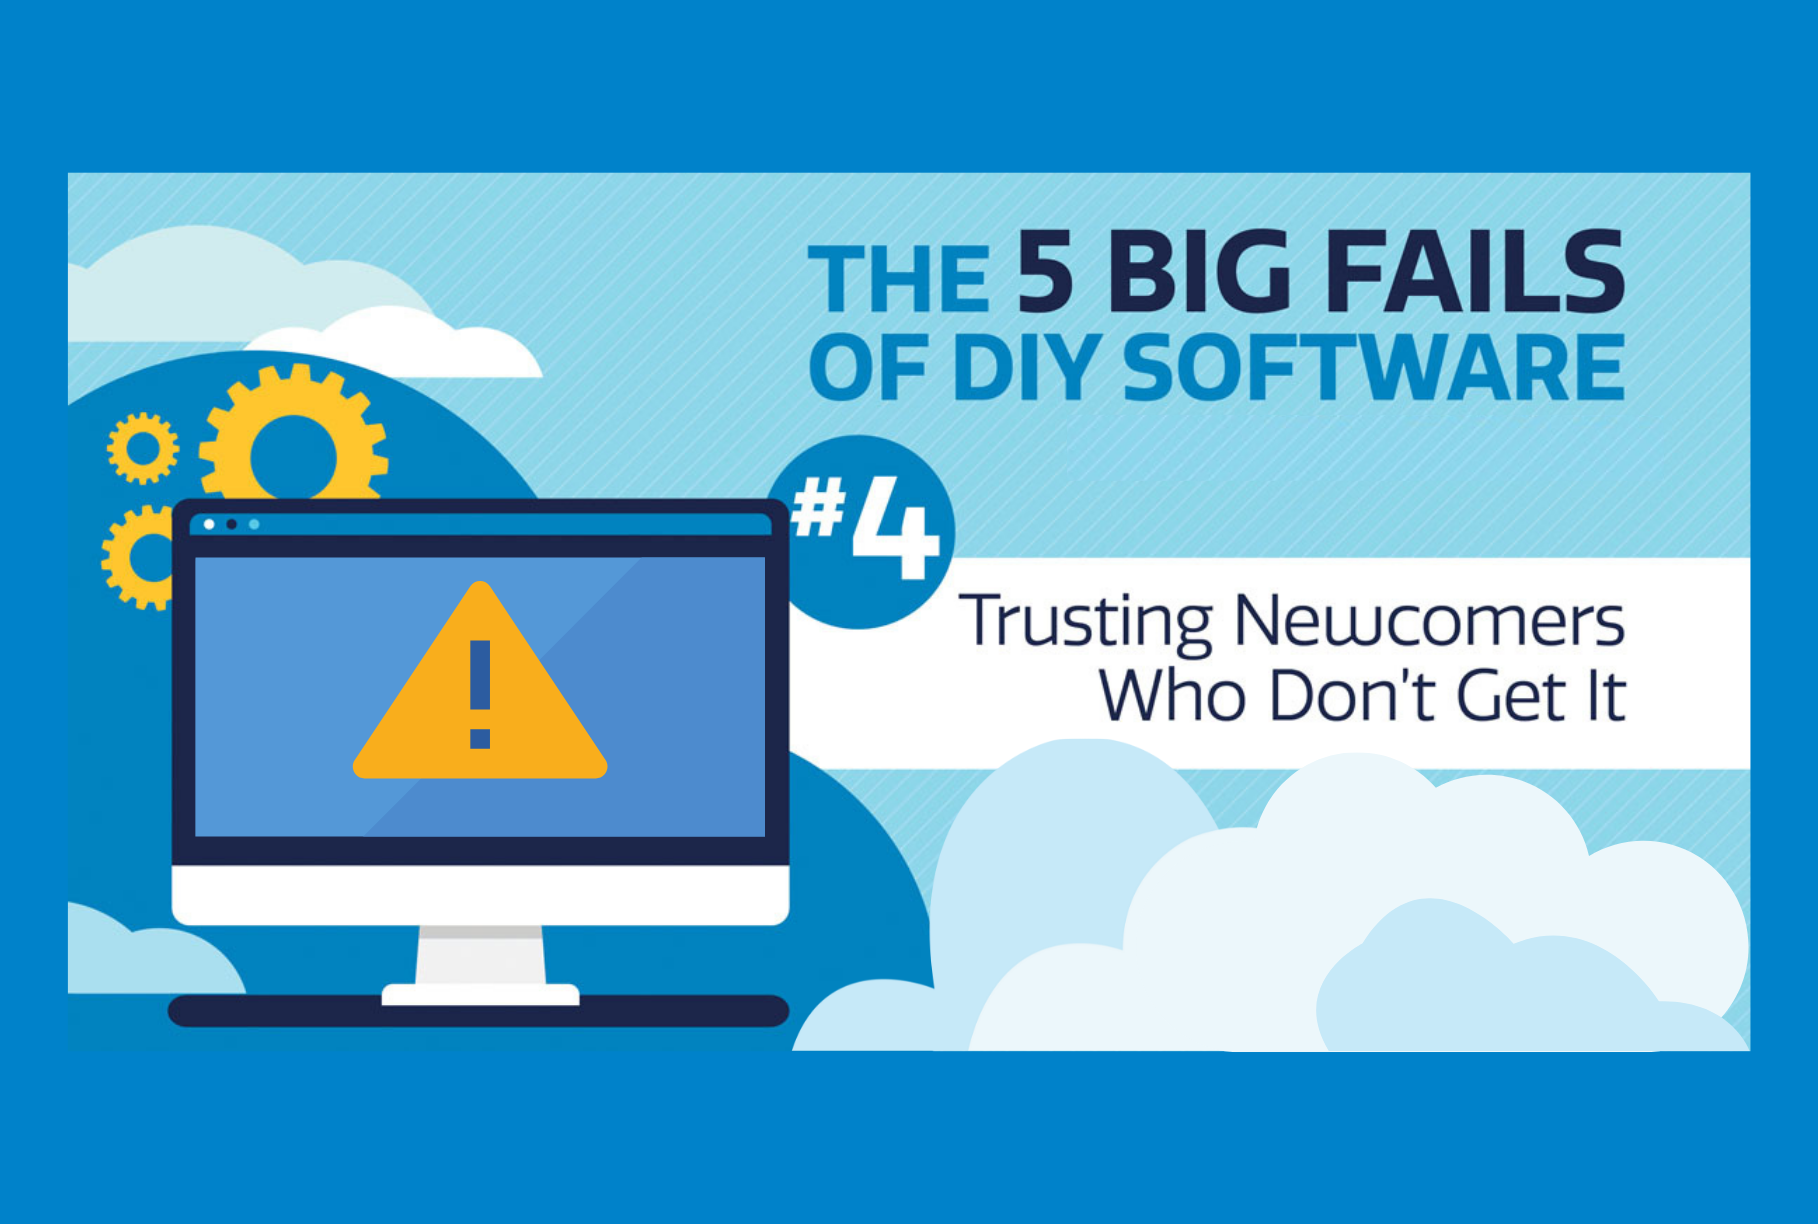 Big Fail #4: Trusting Newcomers Who Don’t Get It